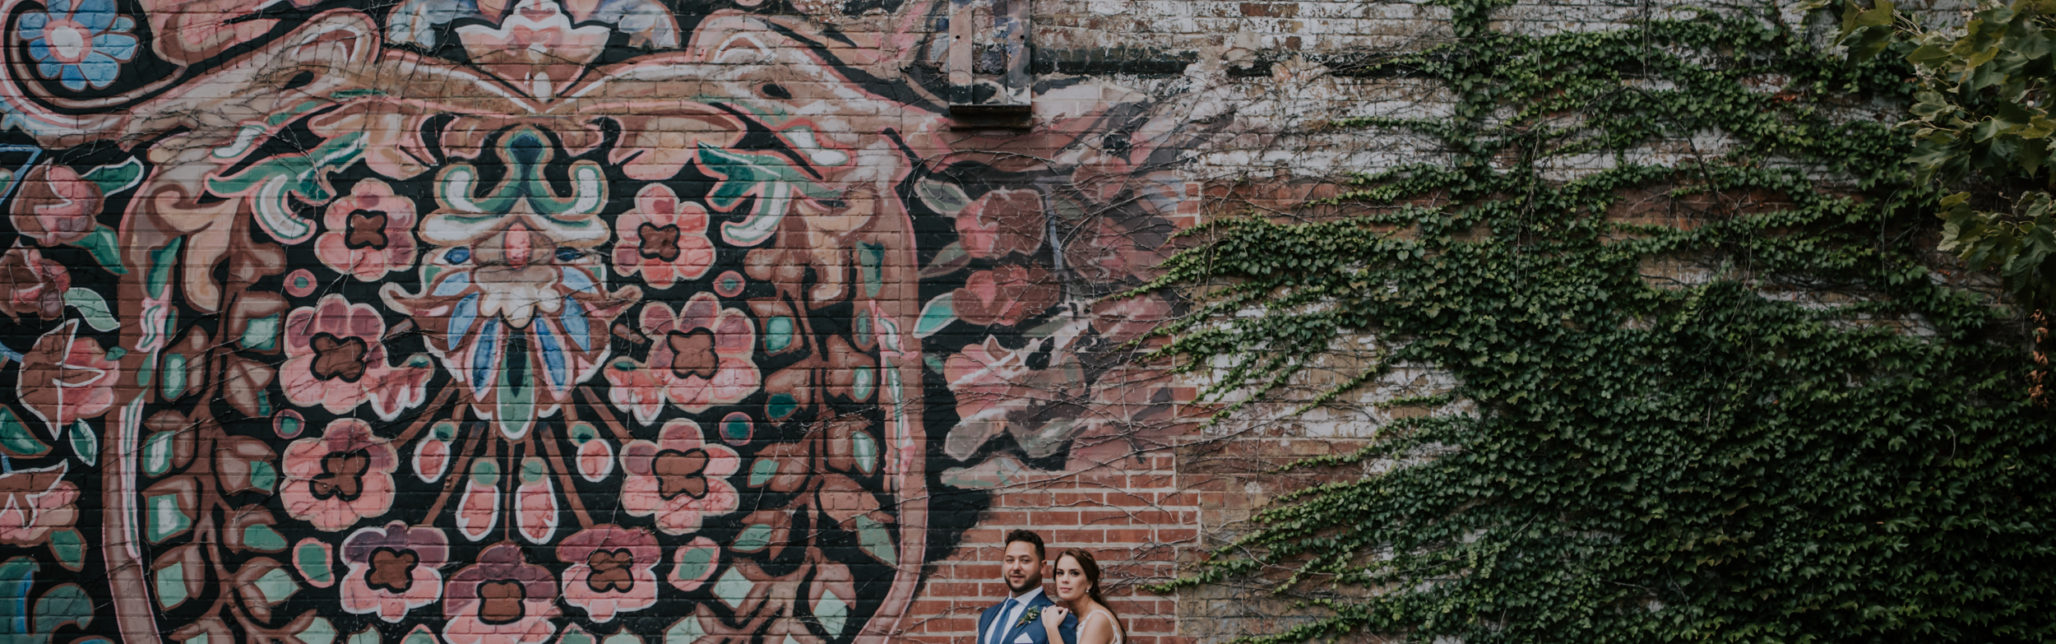 bride and groom standing against a graffiti brick wall